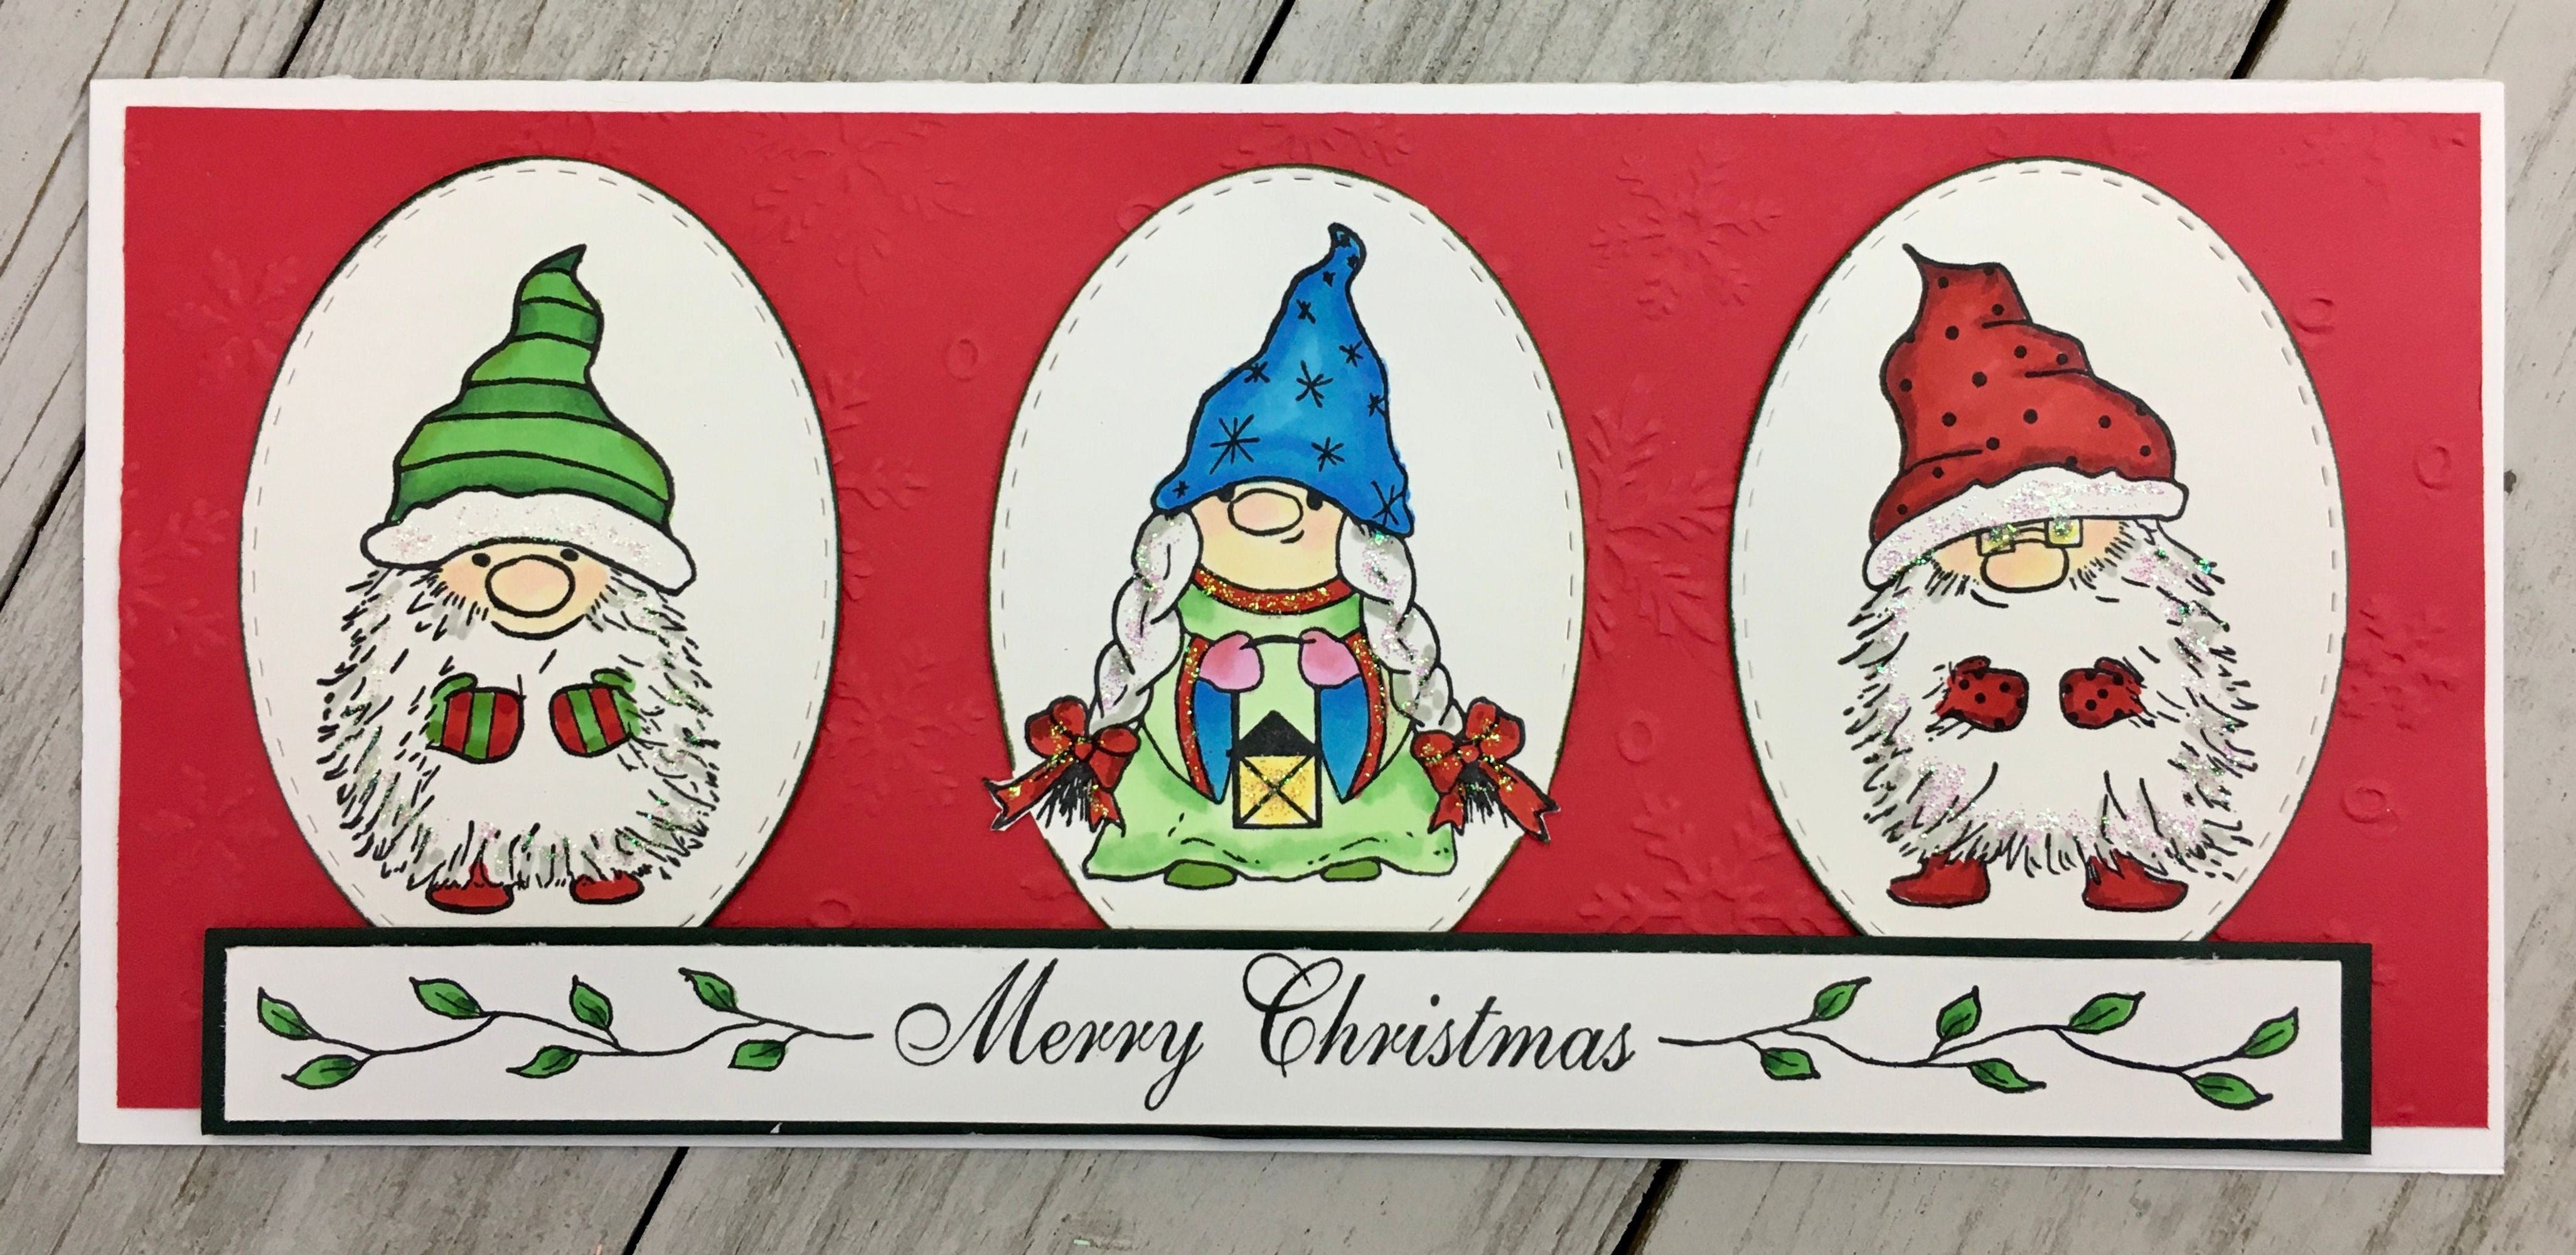 Merry Christmas Vines Rubber Cling Stamp